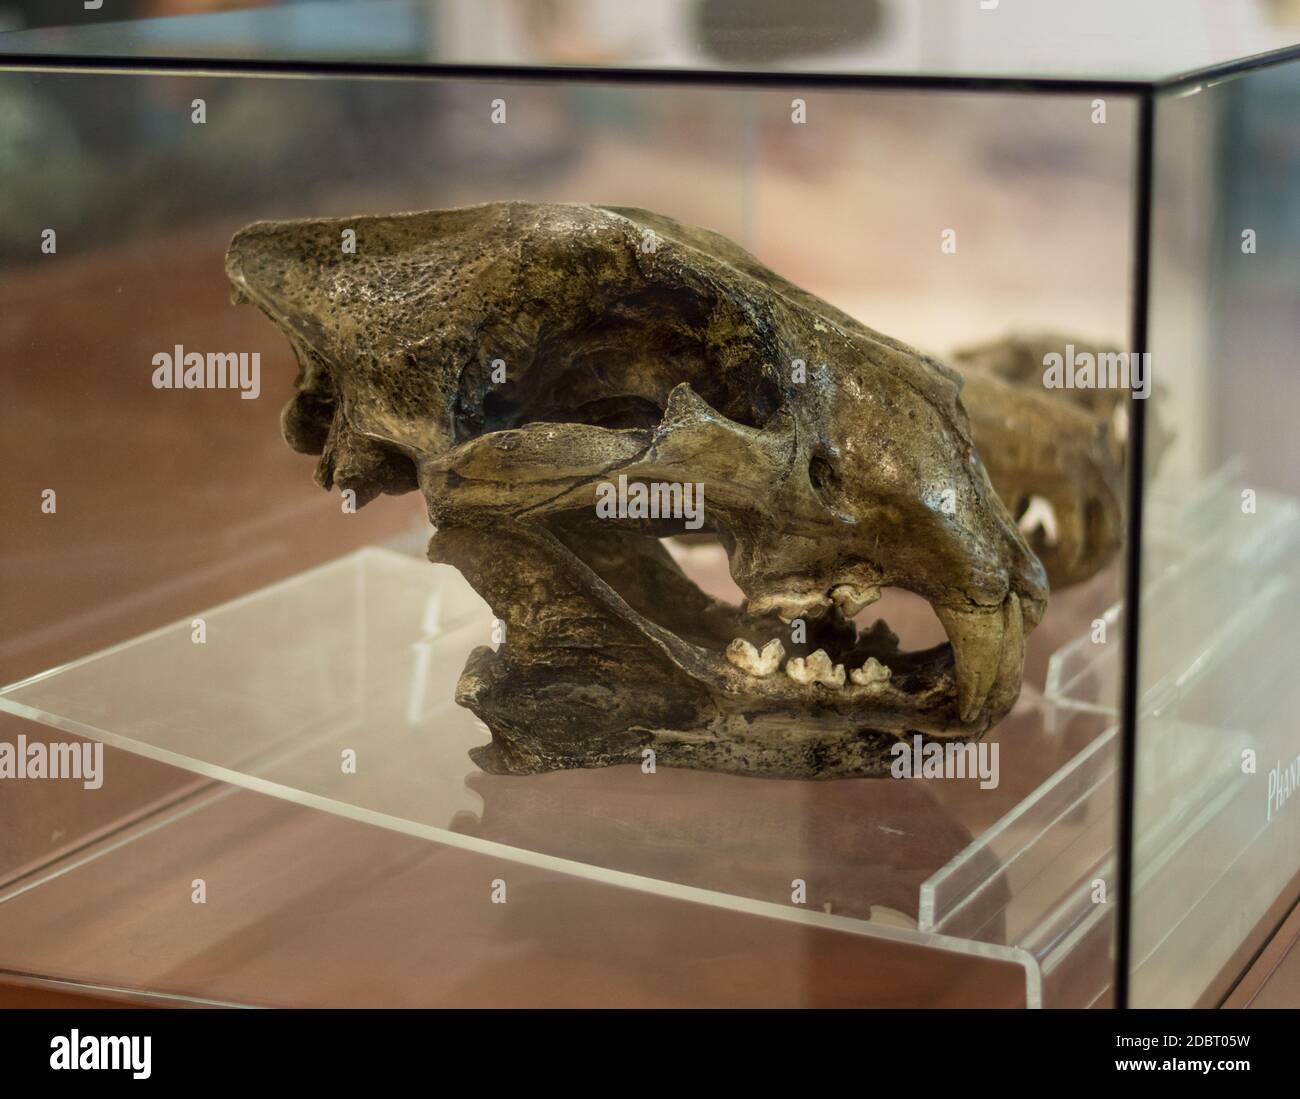 Panthera atrox fossil, North American Lion skull at the Crater museum of  Chicxulub, Yucatan, Mexico. Stock Photo